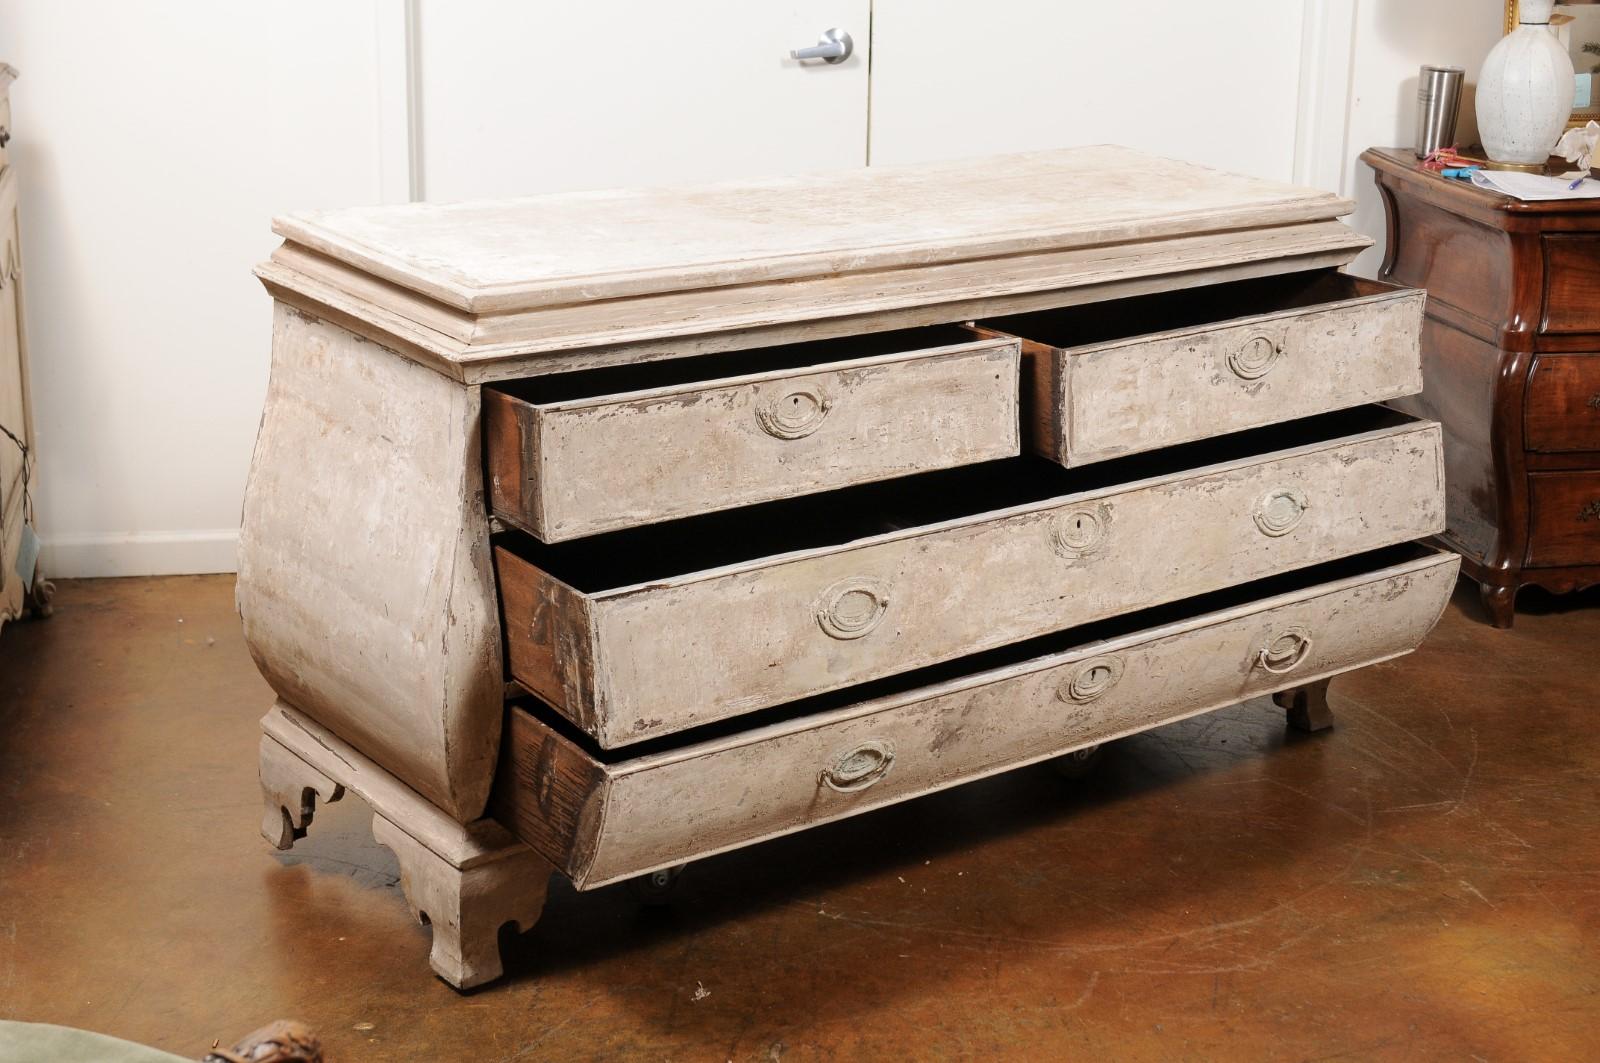 Wood French Painted Rococo Style Bombé Four-Drawer Chest with Ogee Bracket Feet